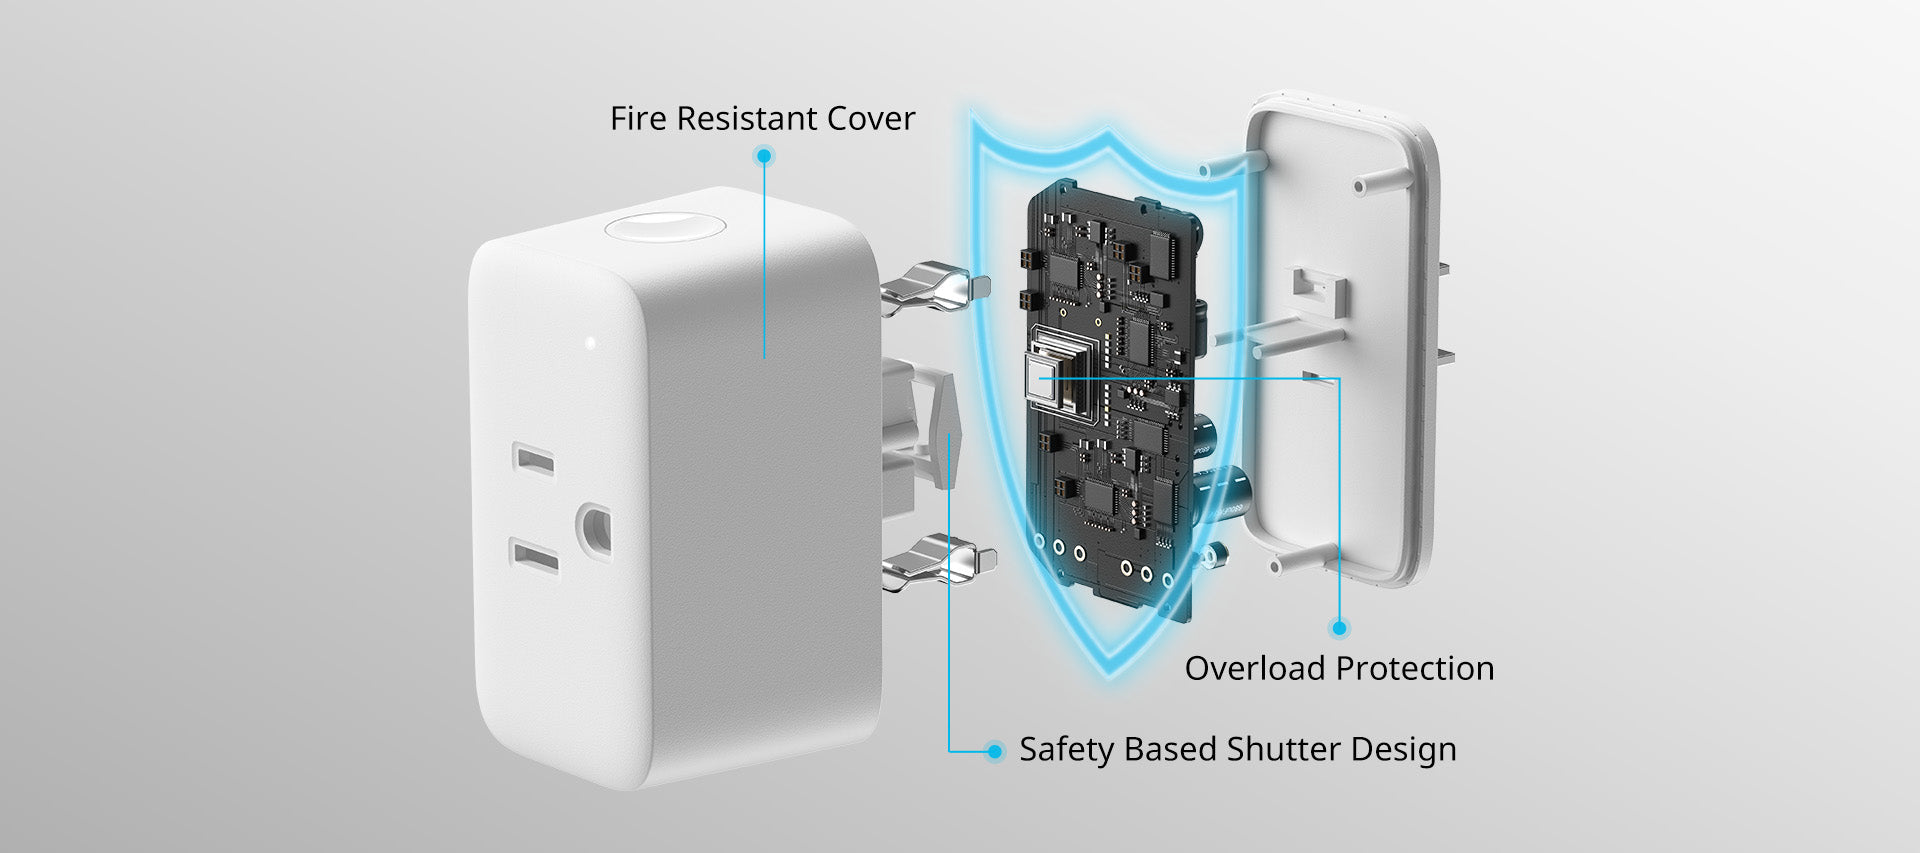 SwitchBot Plug MIni uses high-end components that are built to last and keep your home safe. 